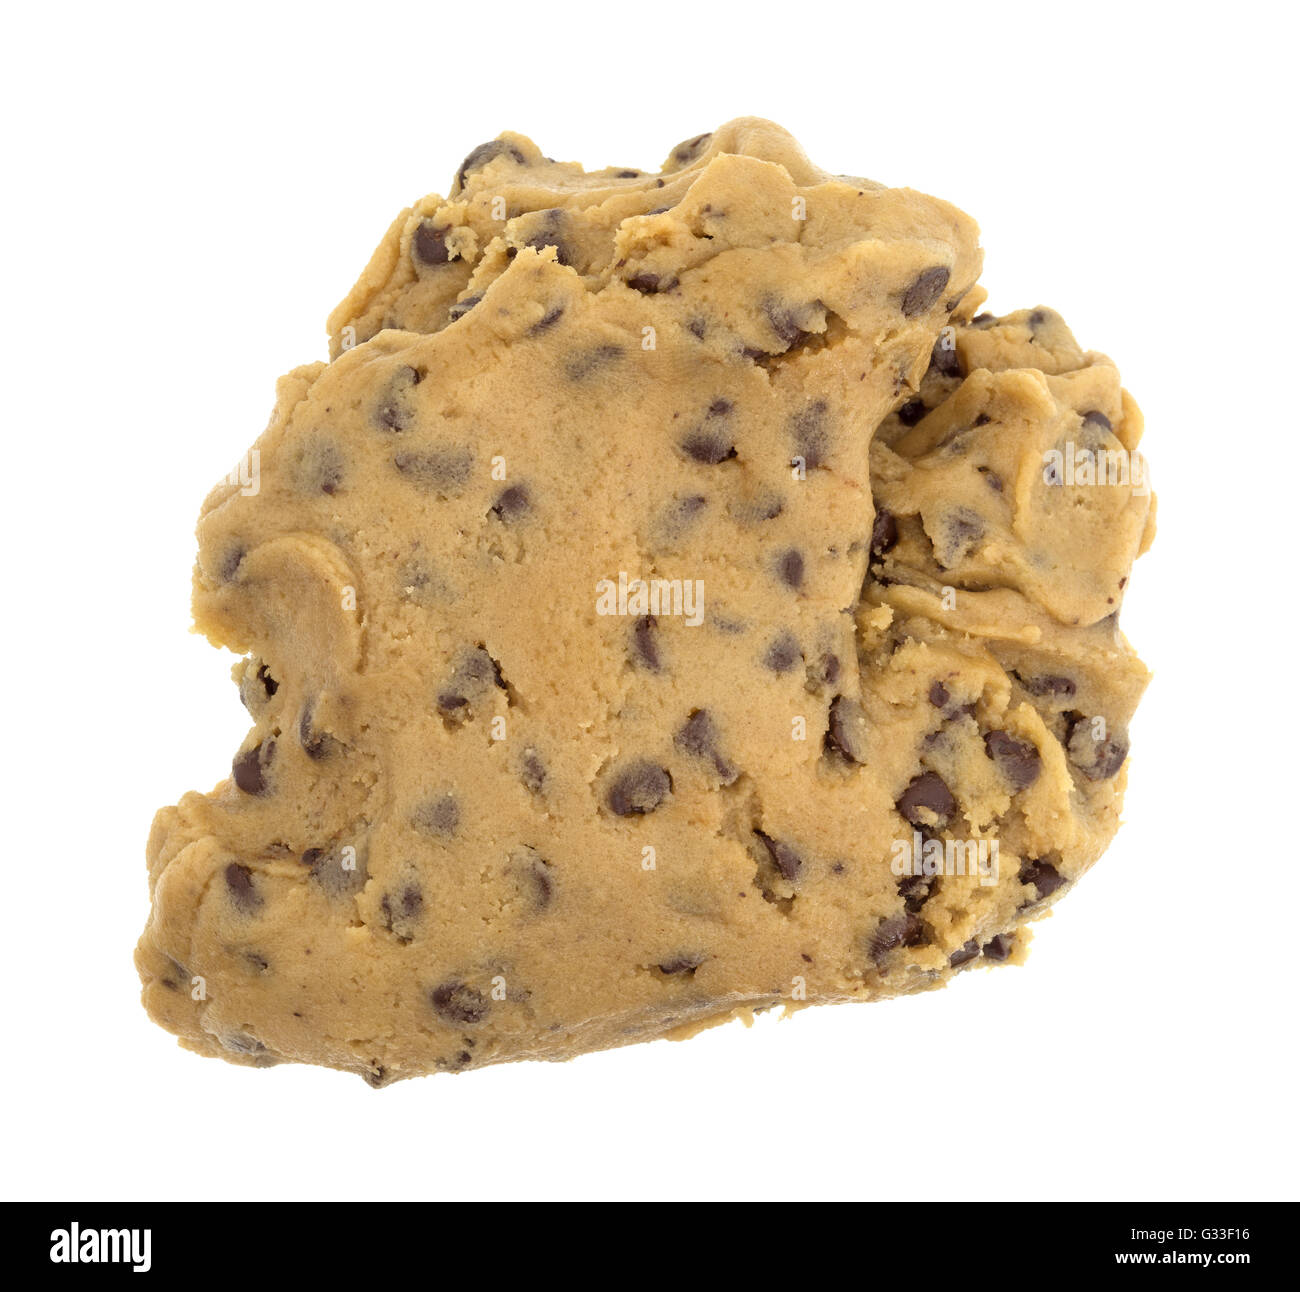 A ball of chocolate chip cookie dough isolated on a white background. Stock Photo